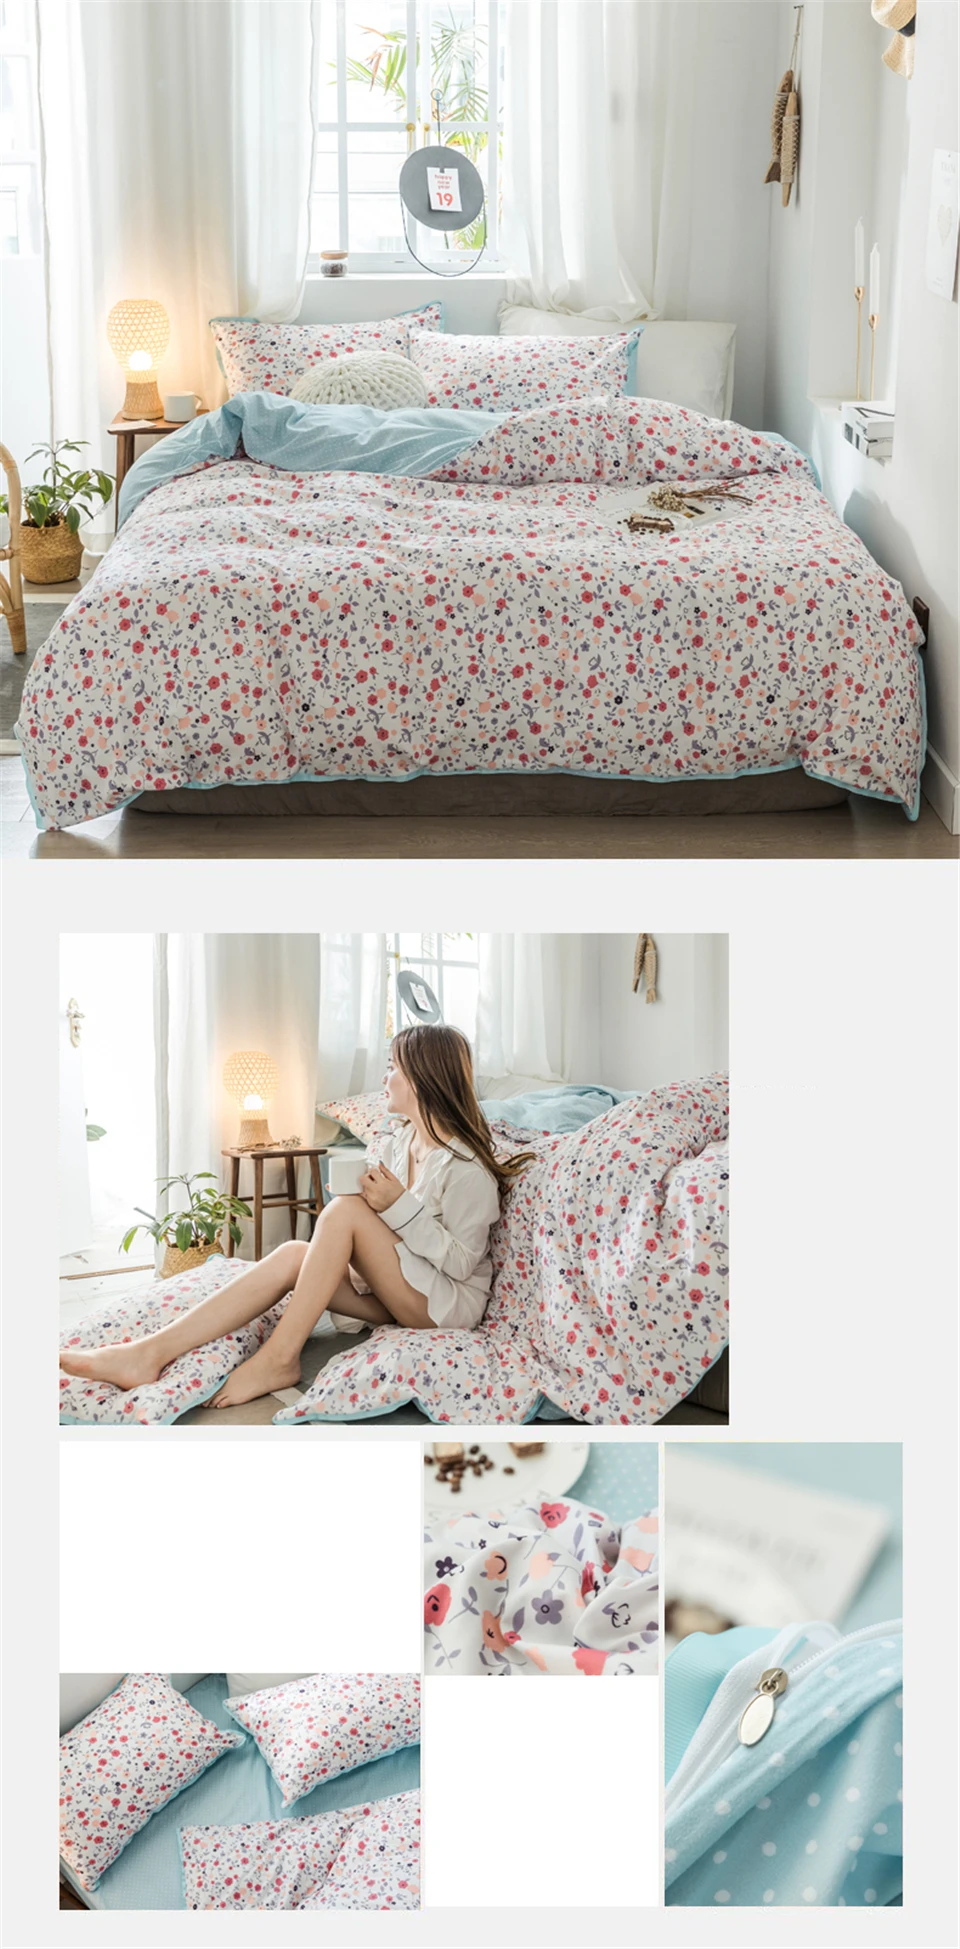 SlowDream Bedding Set Pastoral Style Flowers Bedspread Duvet Cover Set Flat Sheet For Adult Child Single Bed 1.0/1.2 Double